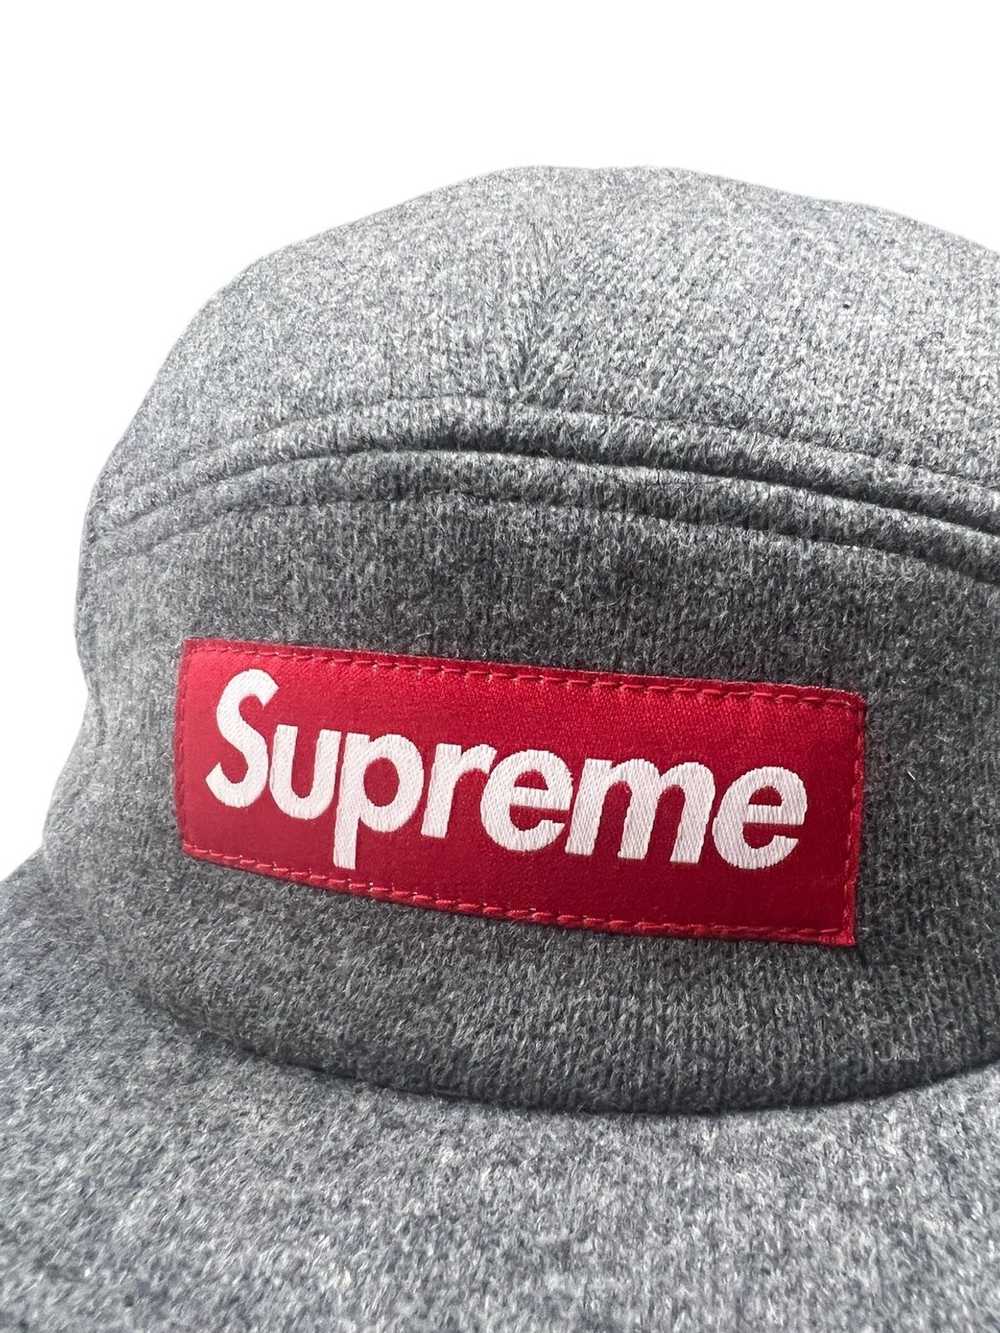 Supreme Supreme Wool Fitted Camp Cap - image 4